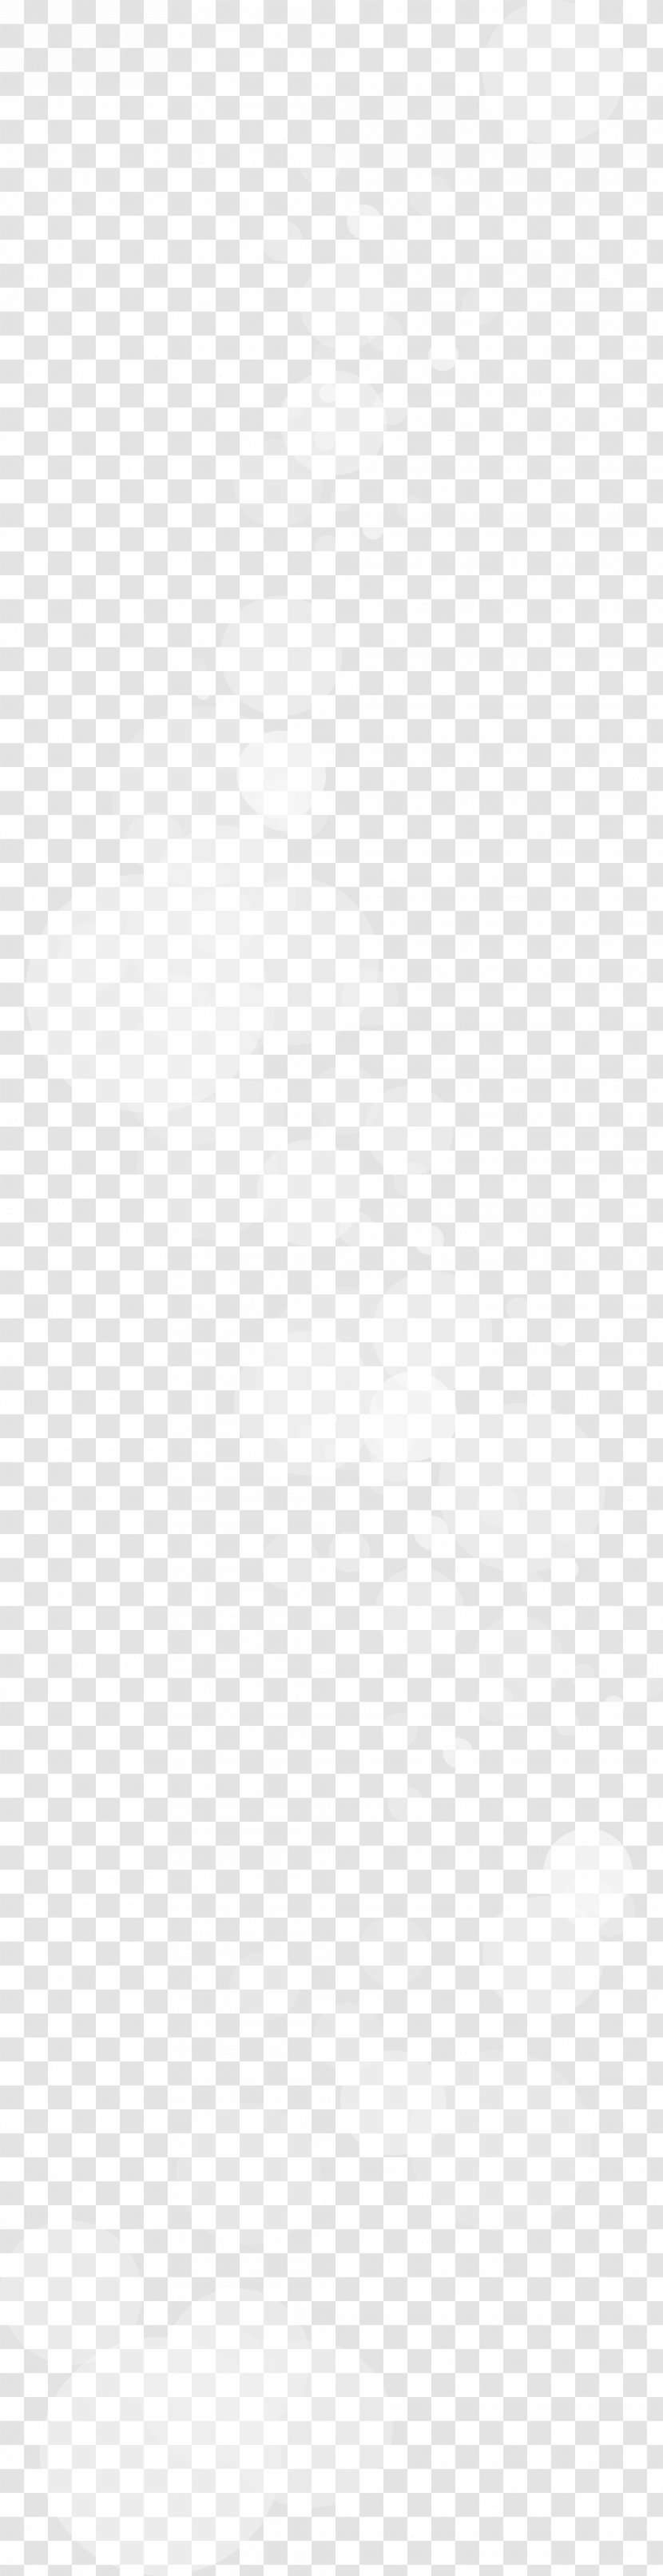 White Black Angle Pattern - Fresh Clouds Transparent PNG